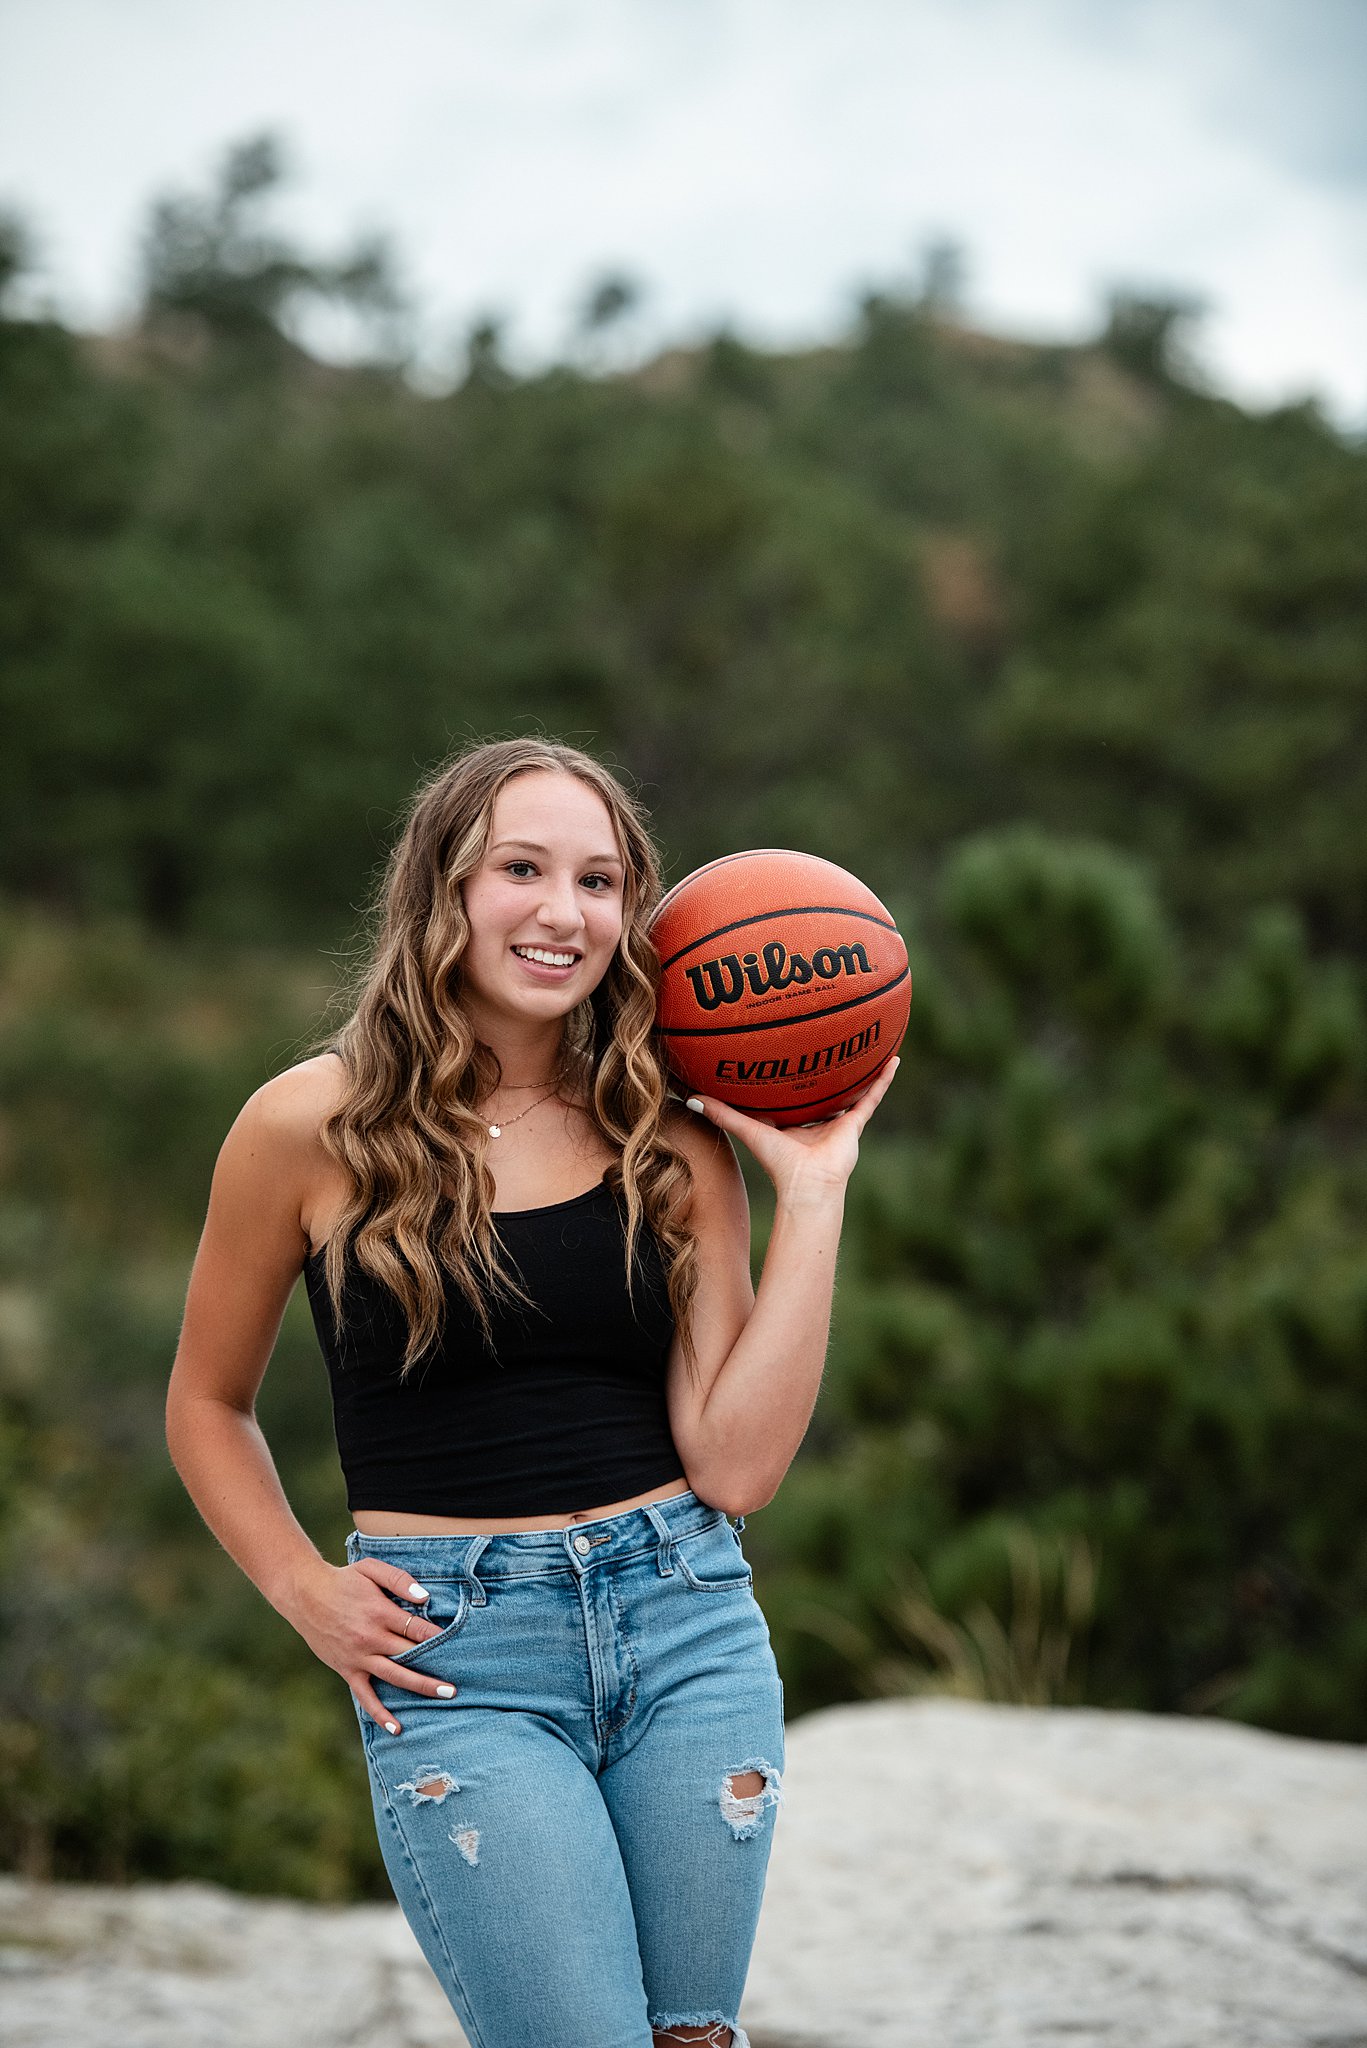 A high school senior in jeans and a black shirt holds a basketball while standing in a rock in a park